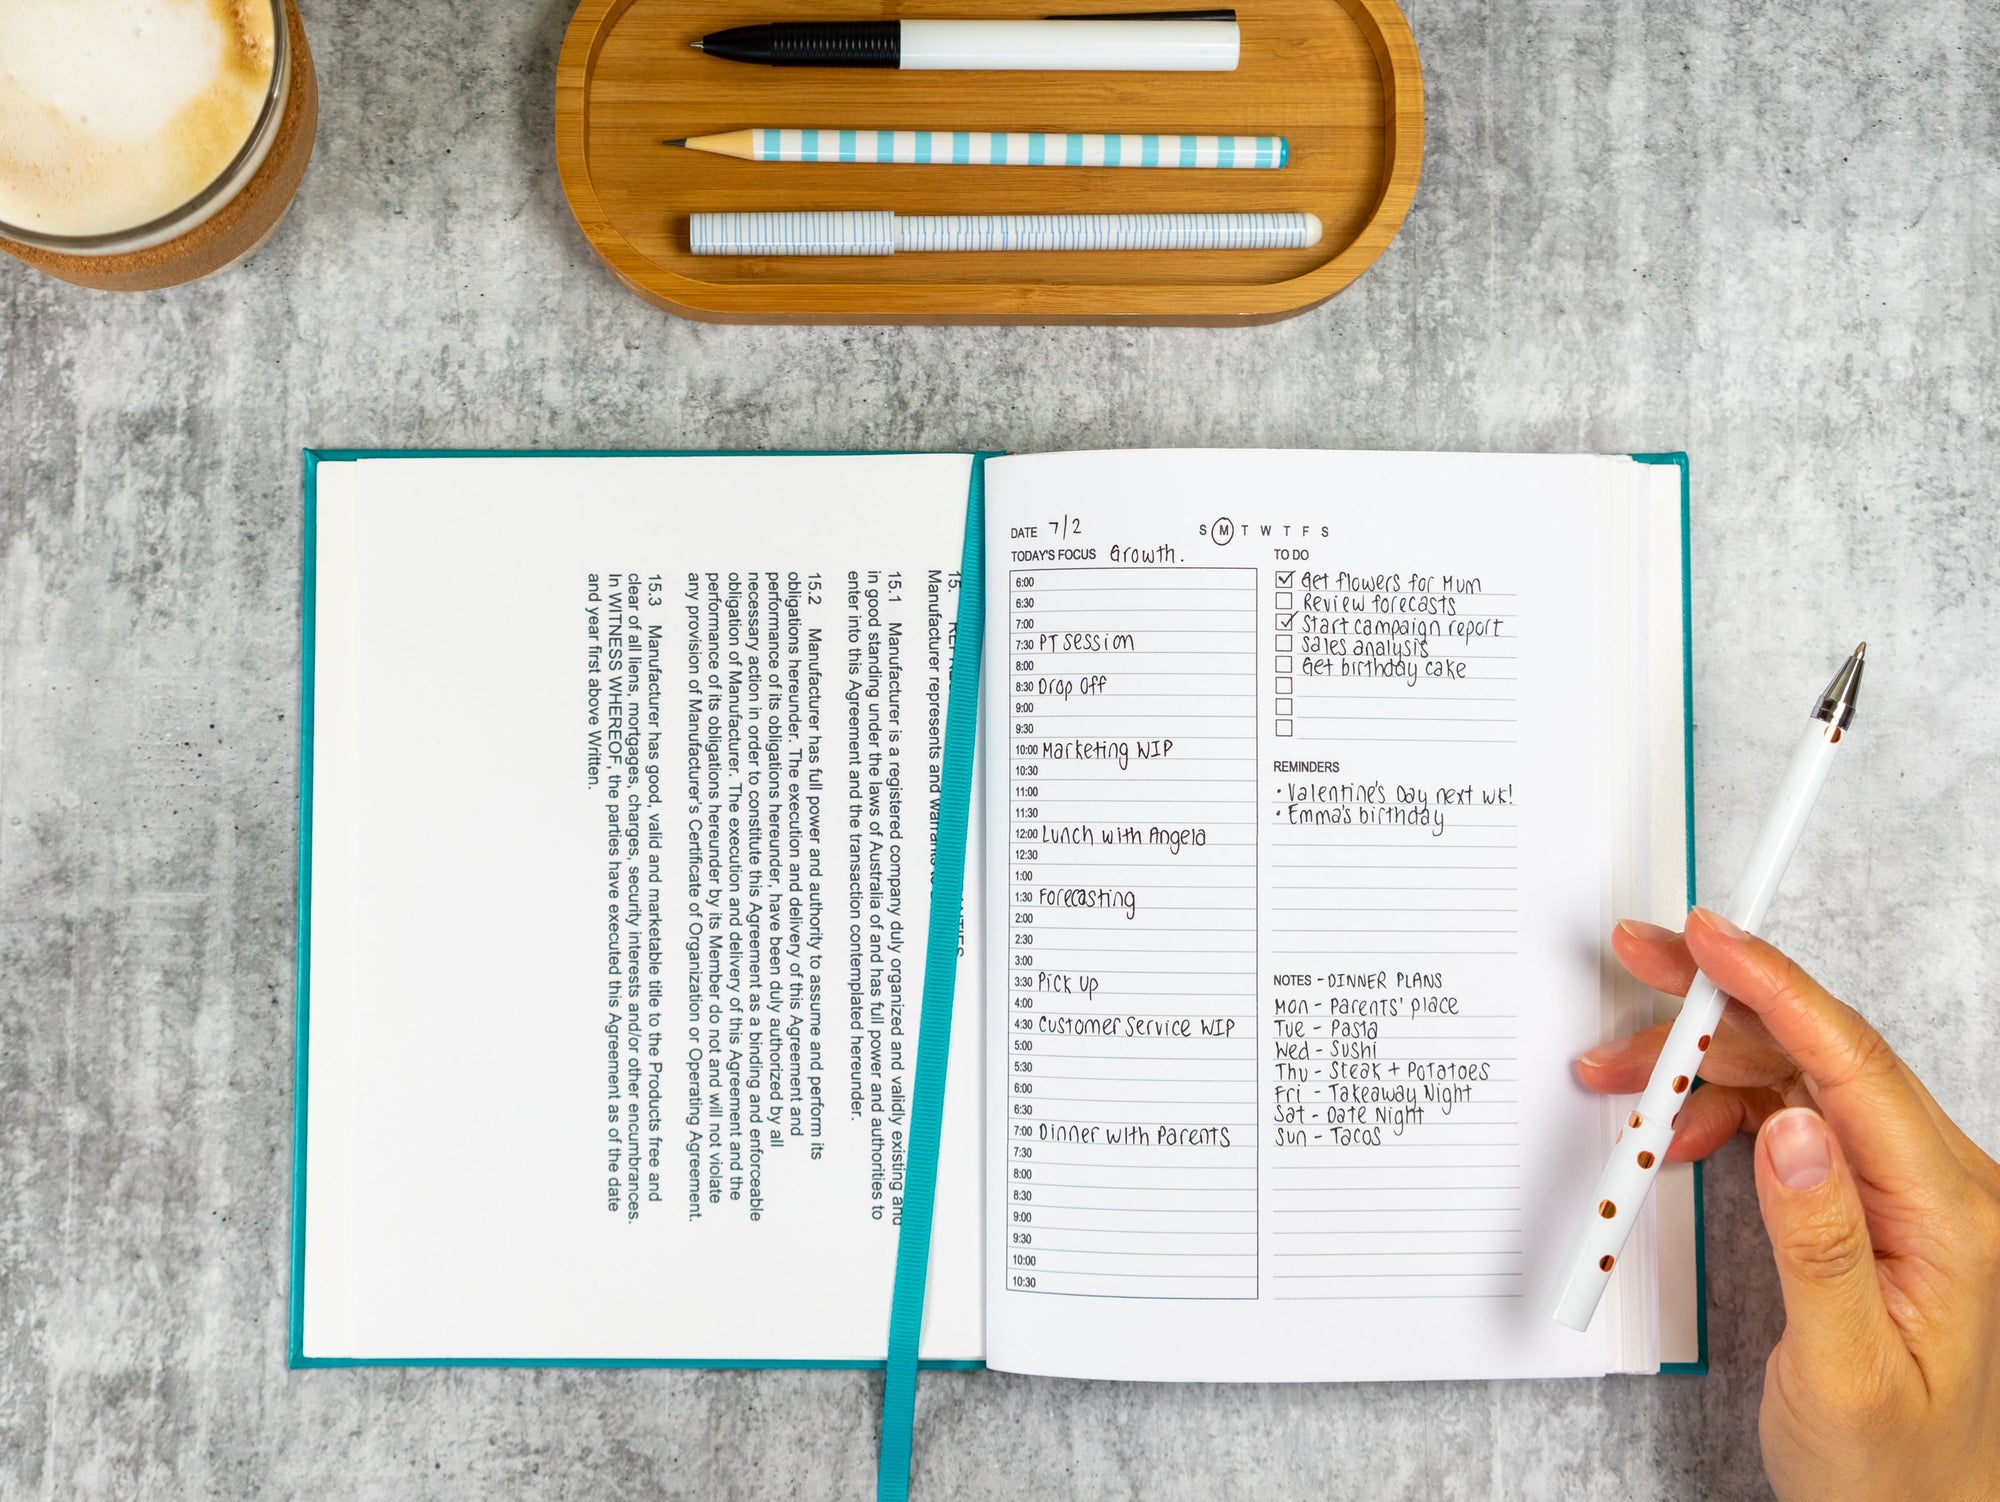 The Paper Saver Reusable Eco Notebook in teal repurposes your paper as its pages so you can write your notes and ideas more sustainably, reducing paper waste and saving the environment.